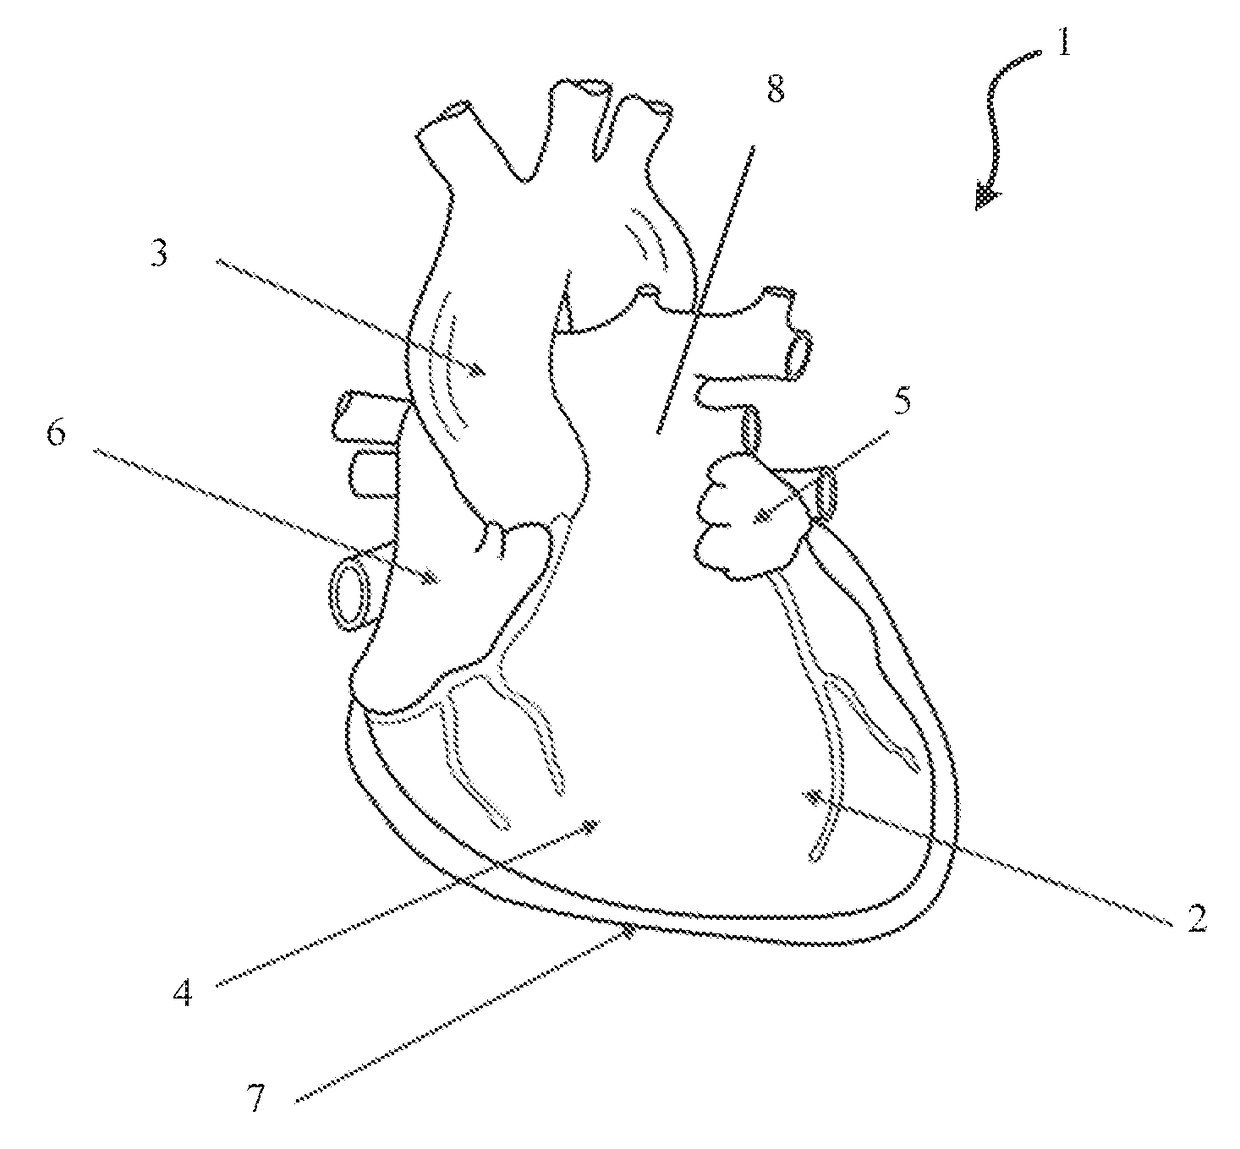 Epicardial heart rhythm management devices, systems and methods